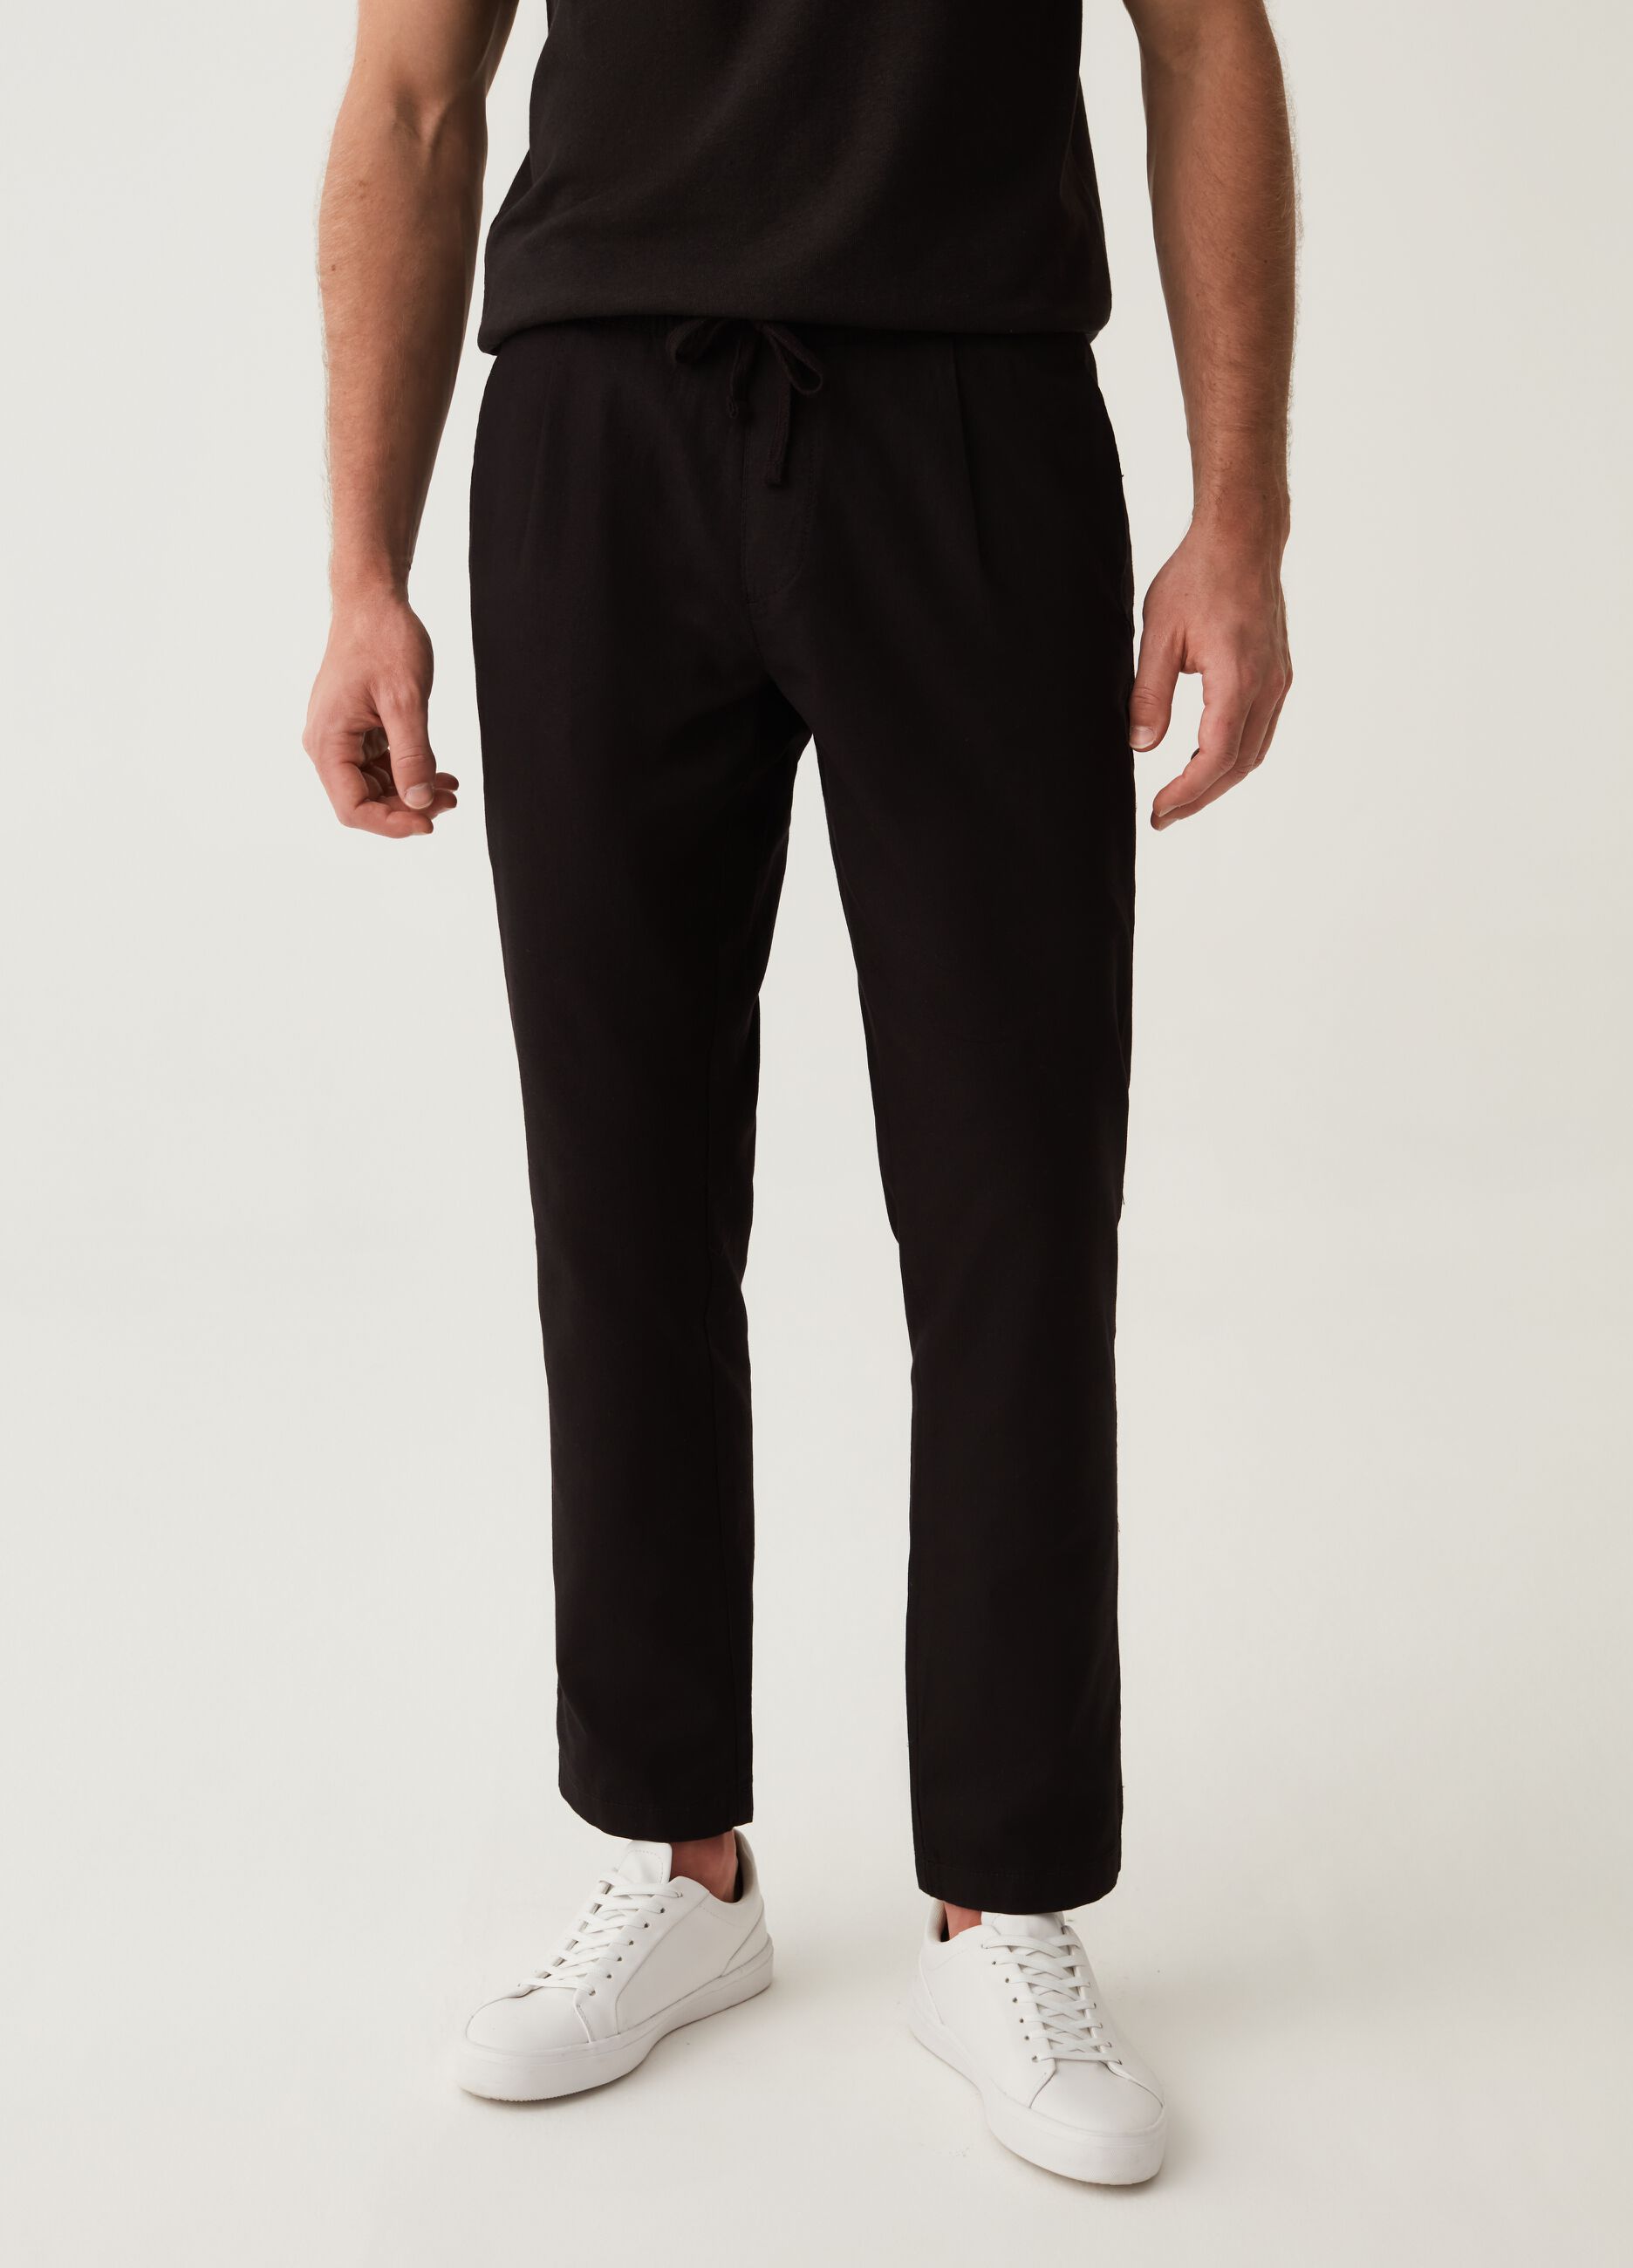 LESS IS BETTER joggers in linen and cotton